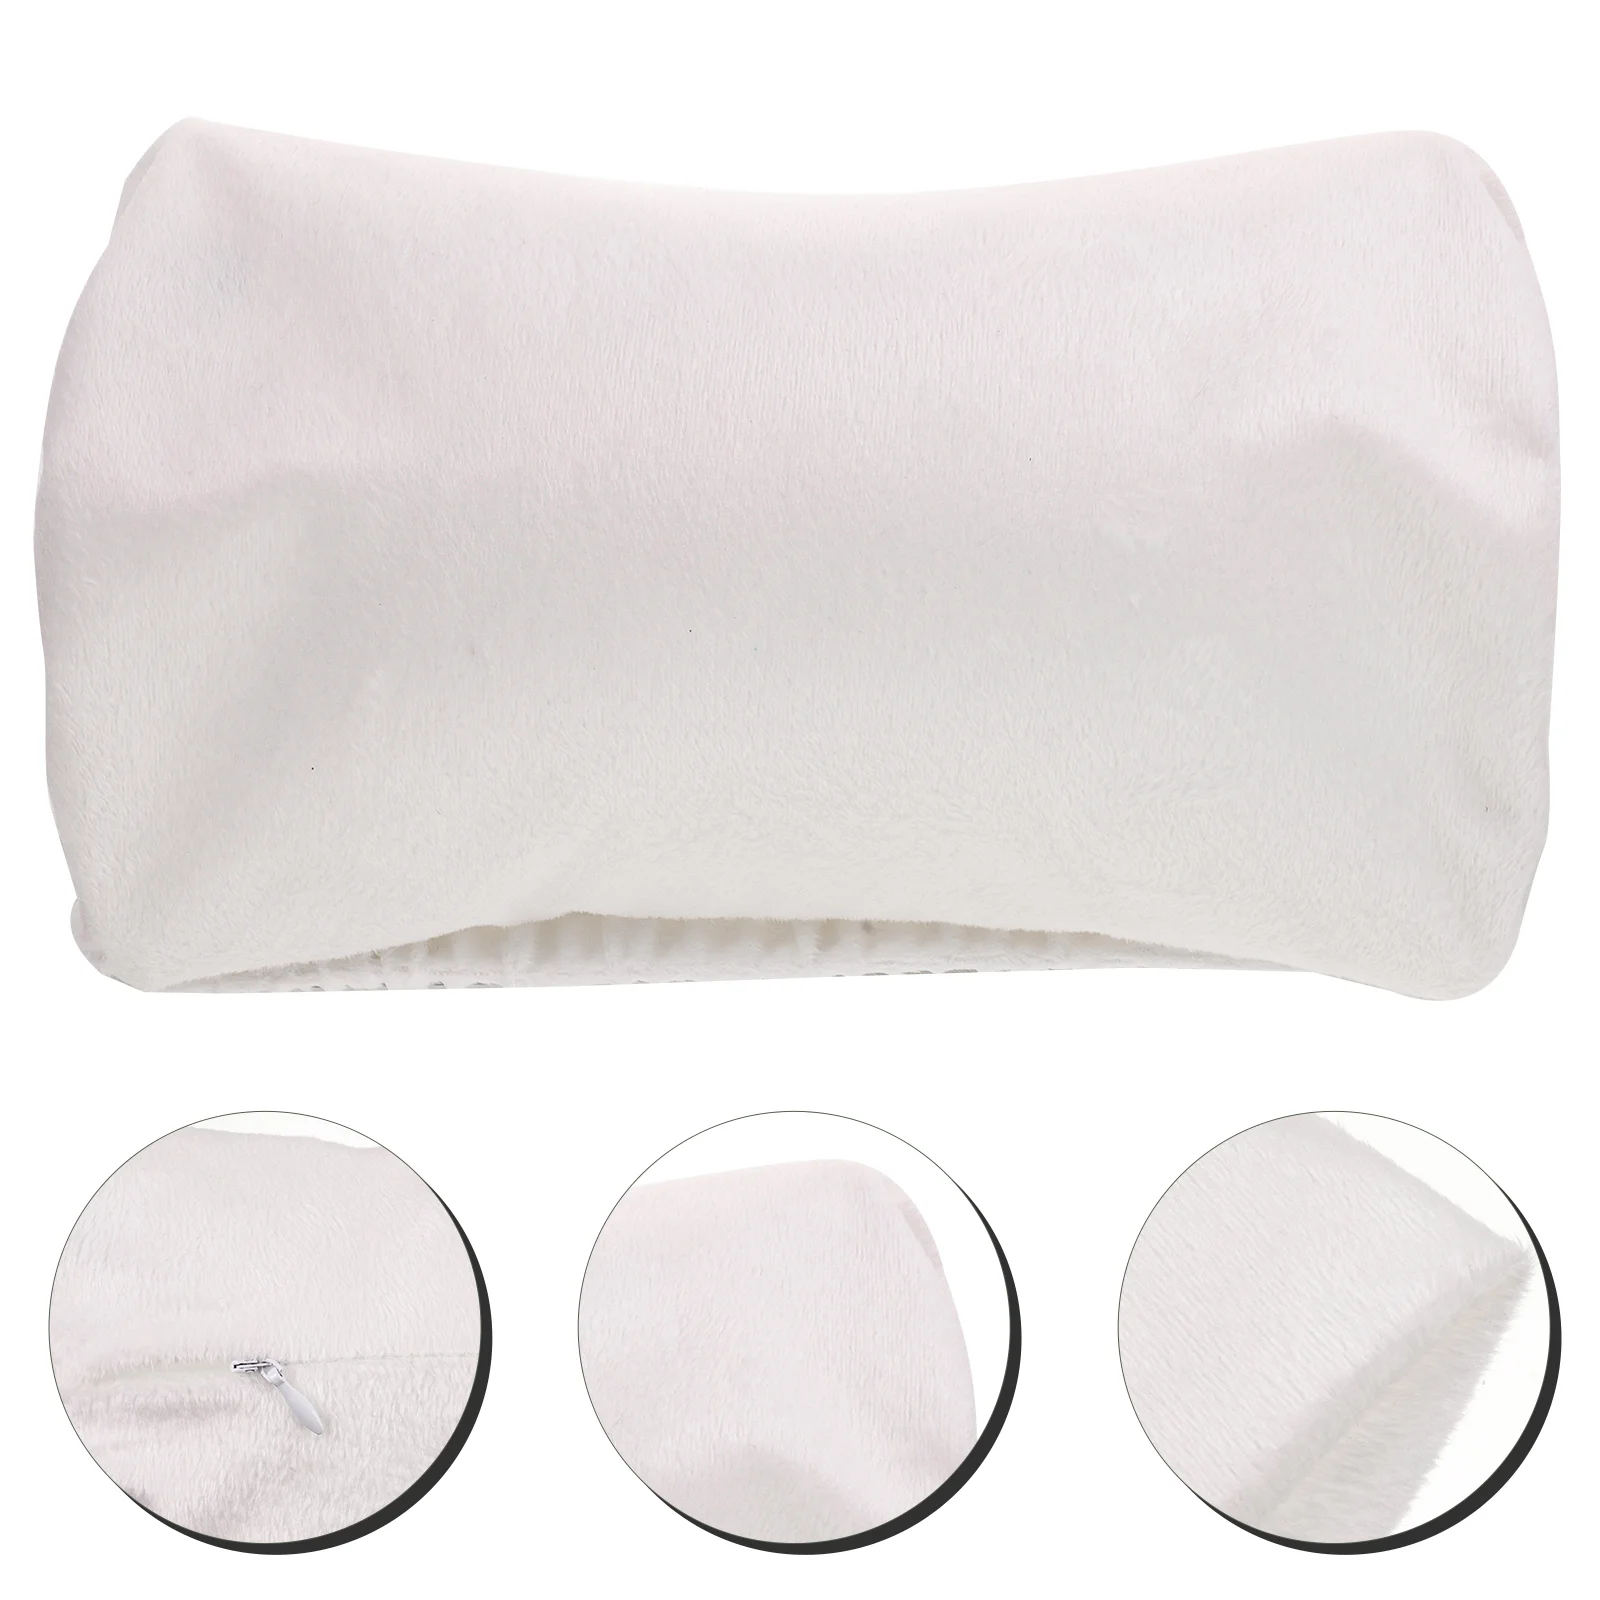 

Washable Cylinder Reusable Neck Neck Pillow Decorate for Replace Friends Case Case Circular Home Pillows Pillow Cover